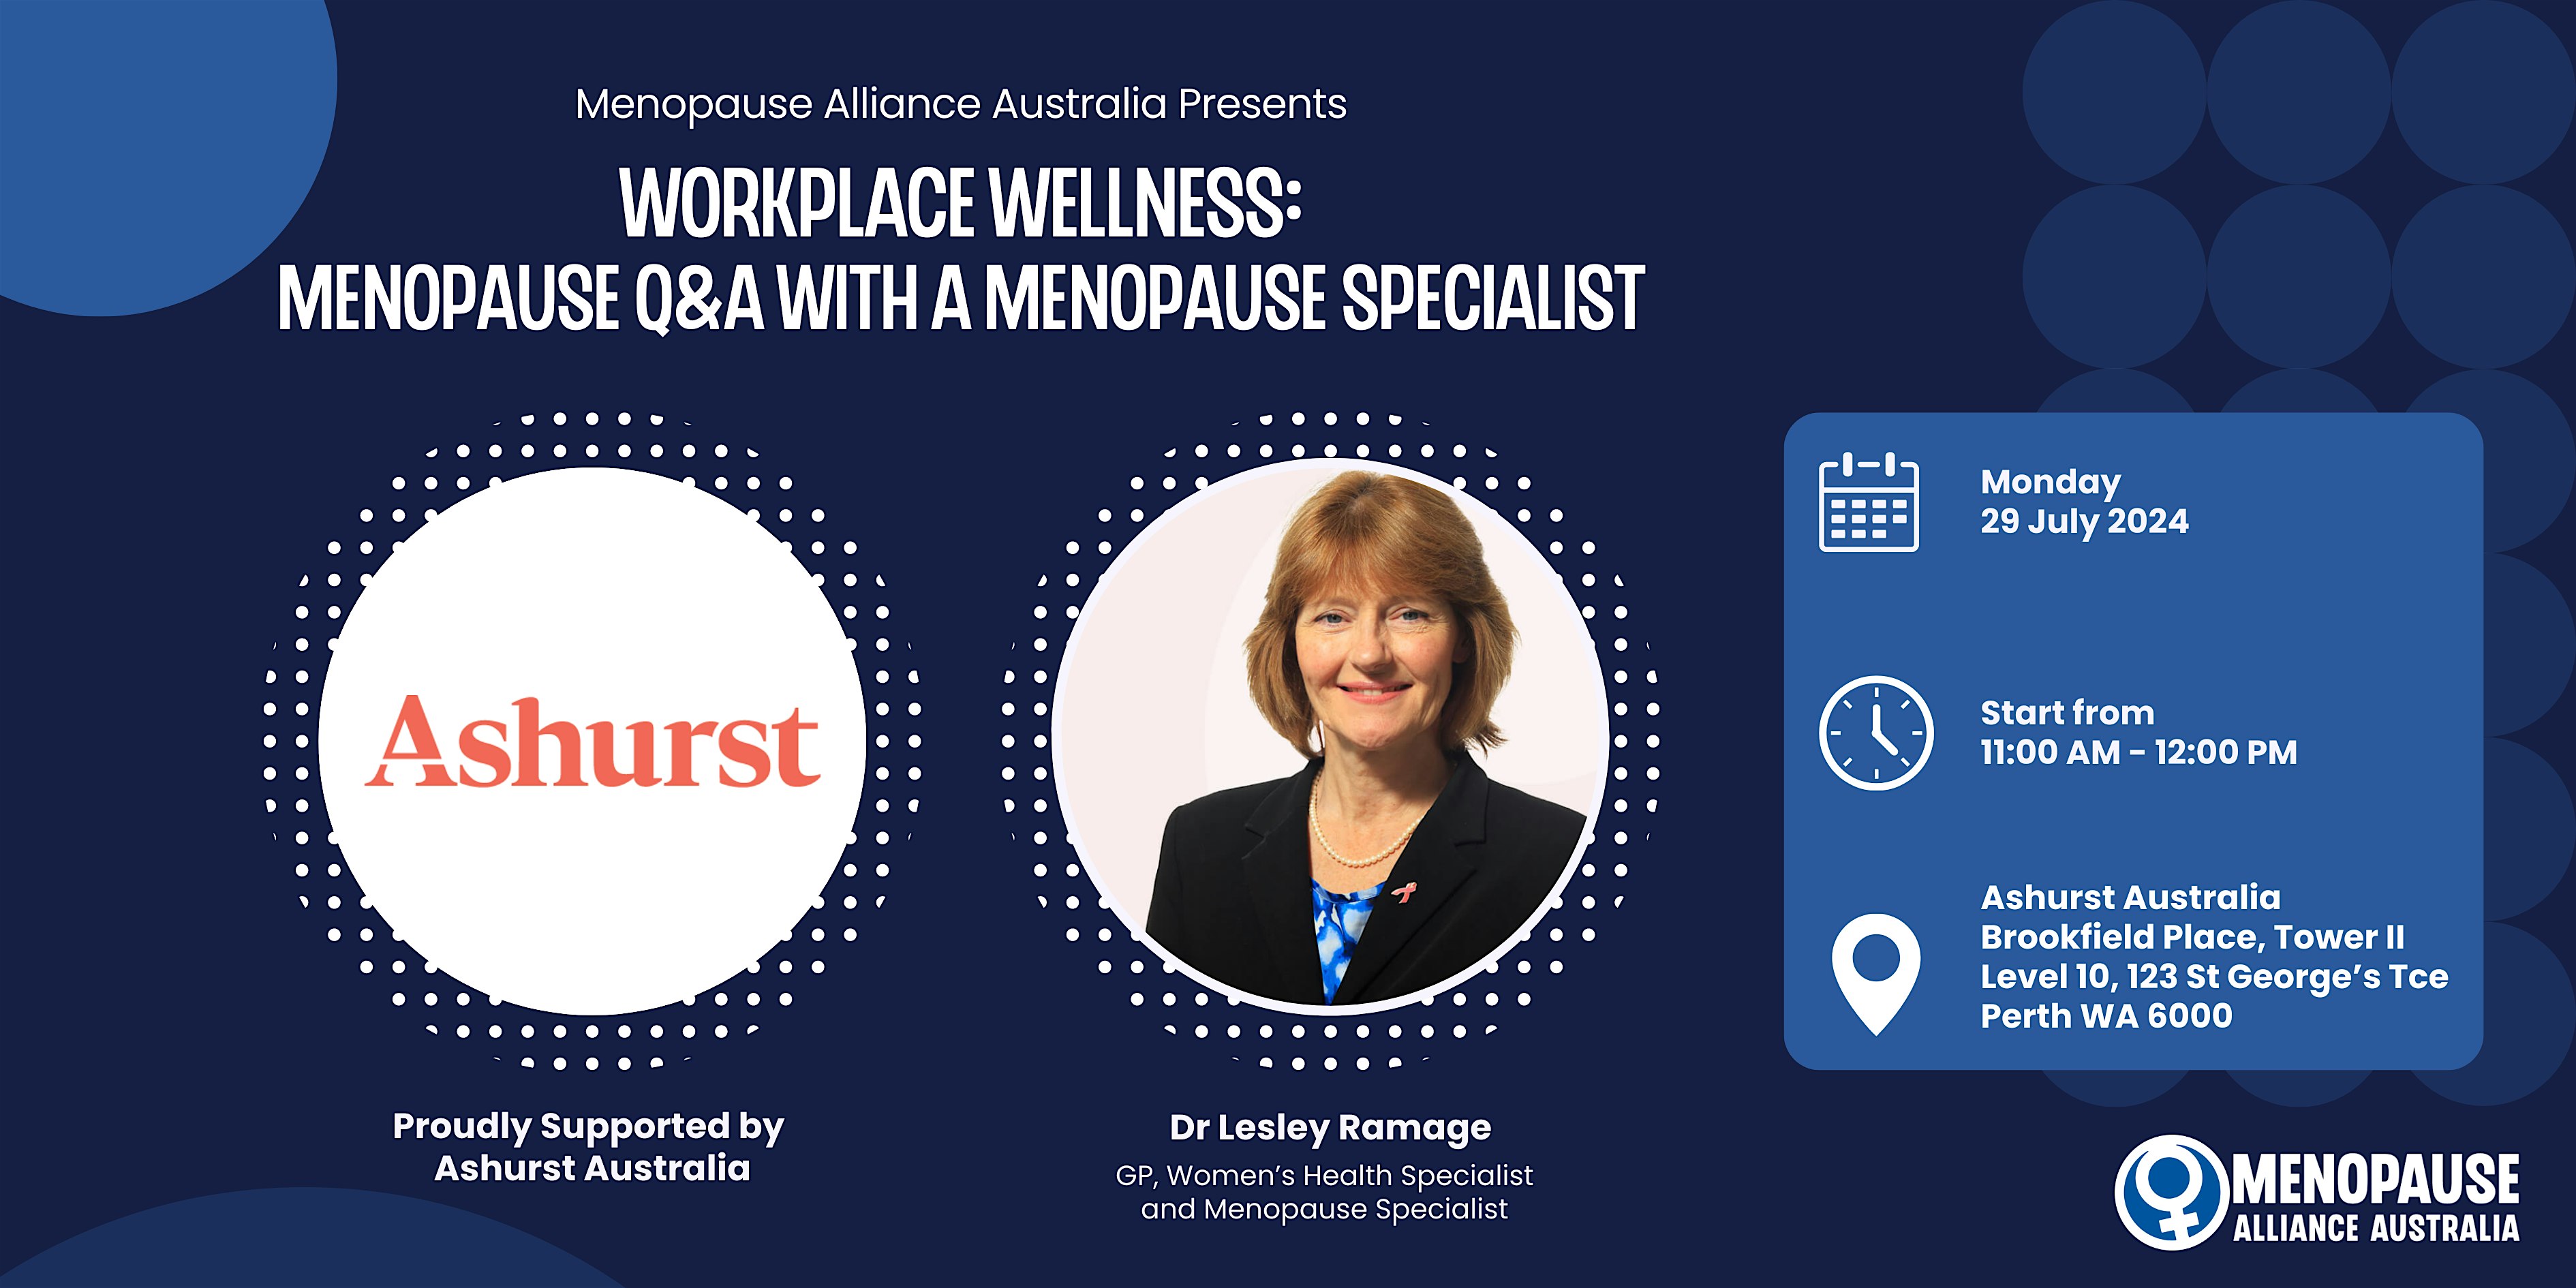 Workplace Wellness: Menopause Q&A with a Menopause Specialist